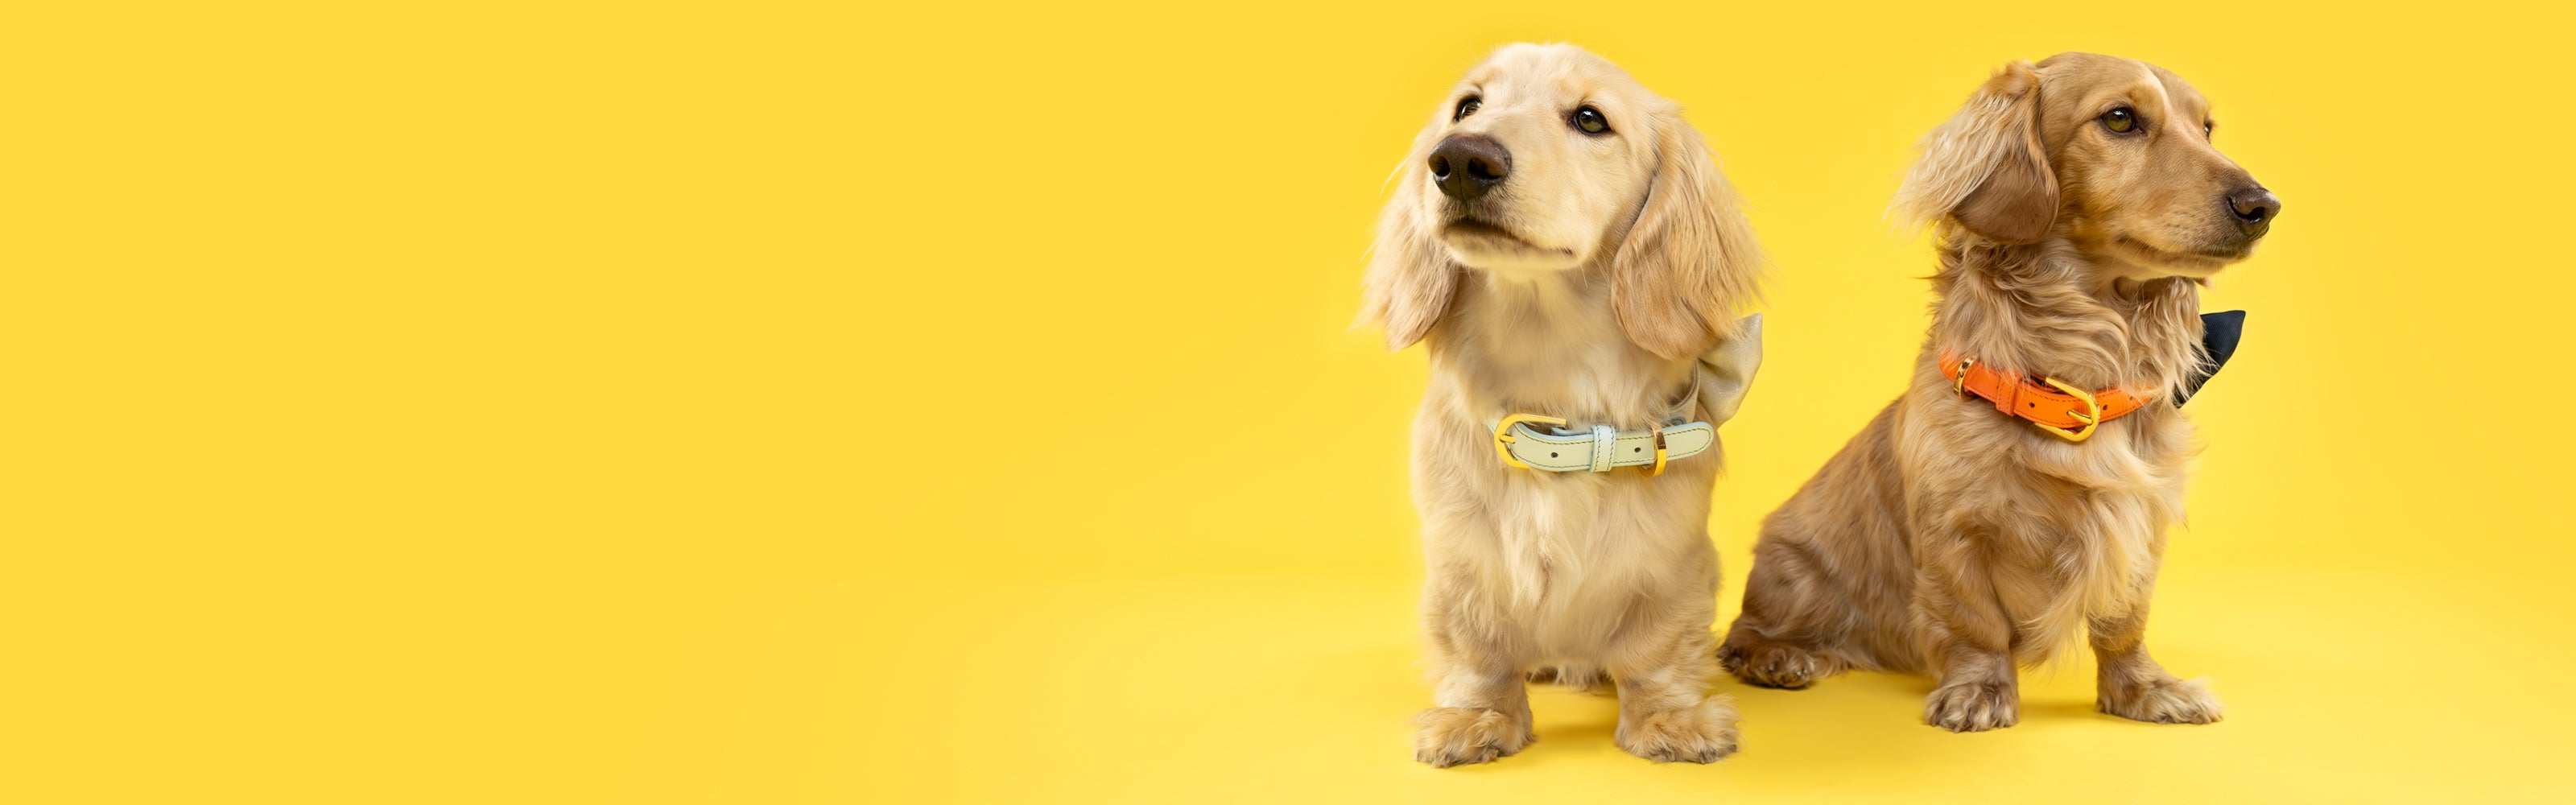 Two dachshund dogs modelling Dear Nora baby blue and orange dog collars - yellow backdrop - banner image